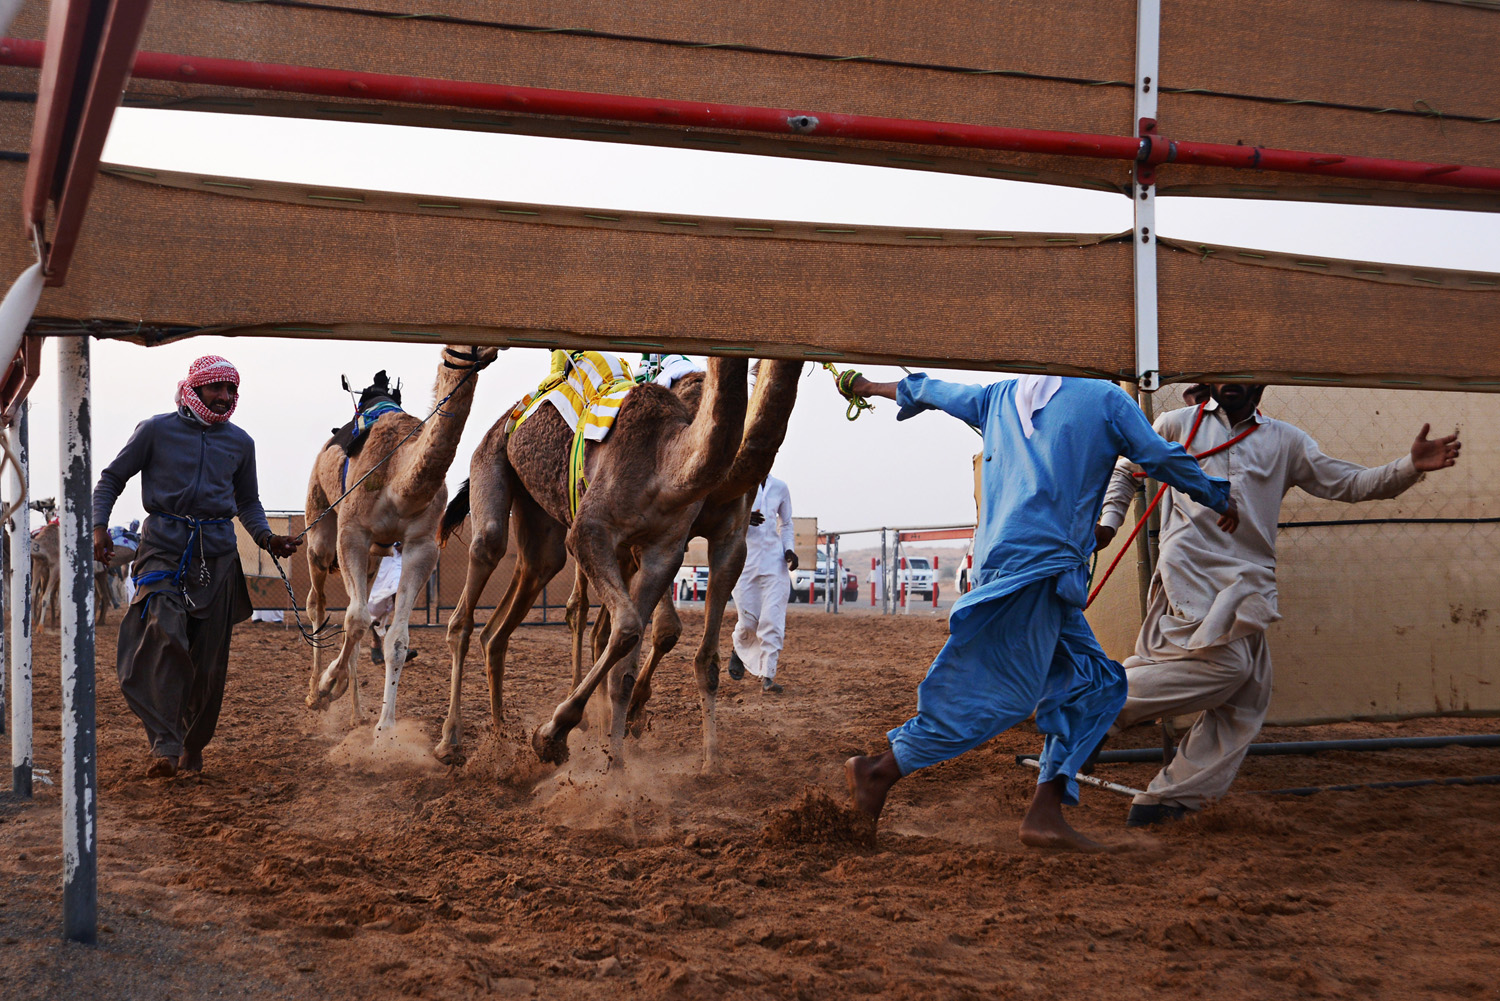 One of Young TPOTY 2021 winner, 14 and under category, Indigo Larmour's images of camel racing, Al Dhaid, Sharjah, UAE 